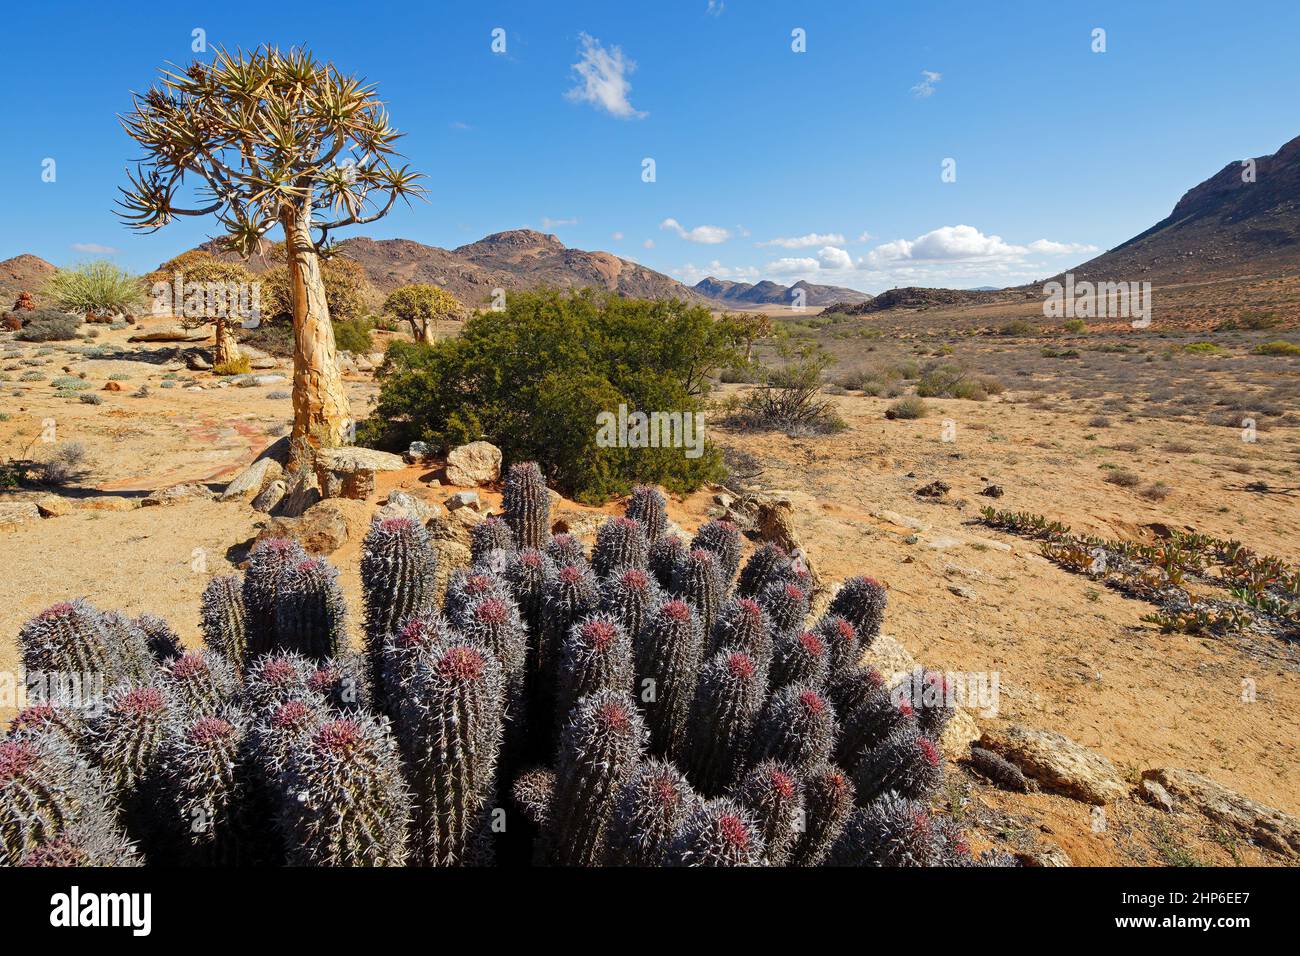 Desert landscape with quiver trees and cactus plants, Northern Cape, South Africa Stock Photo